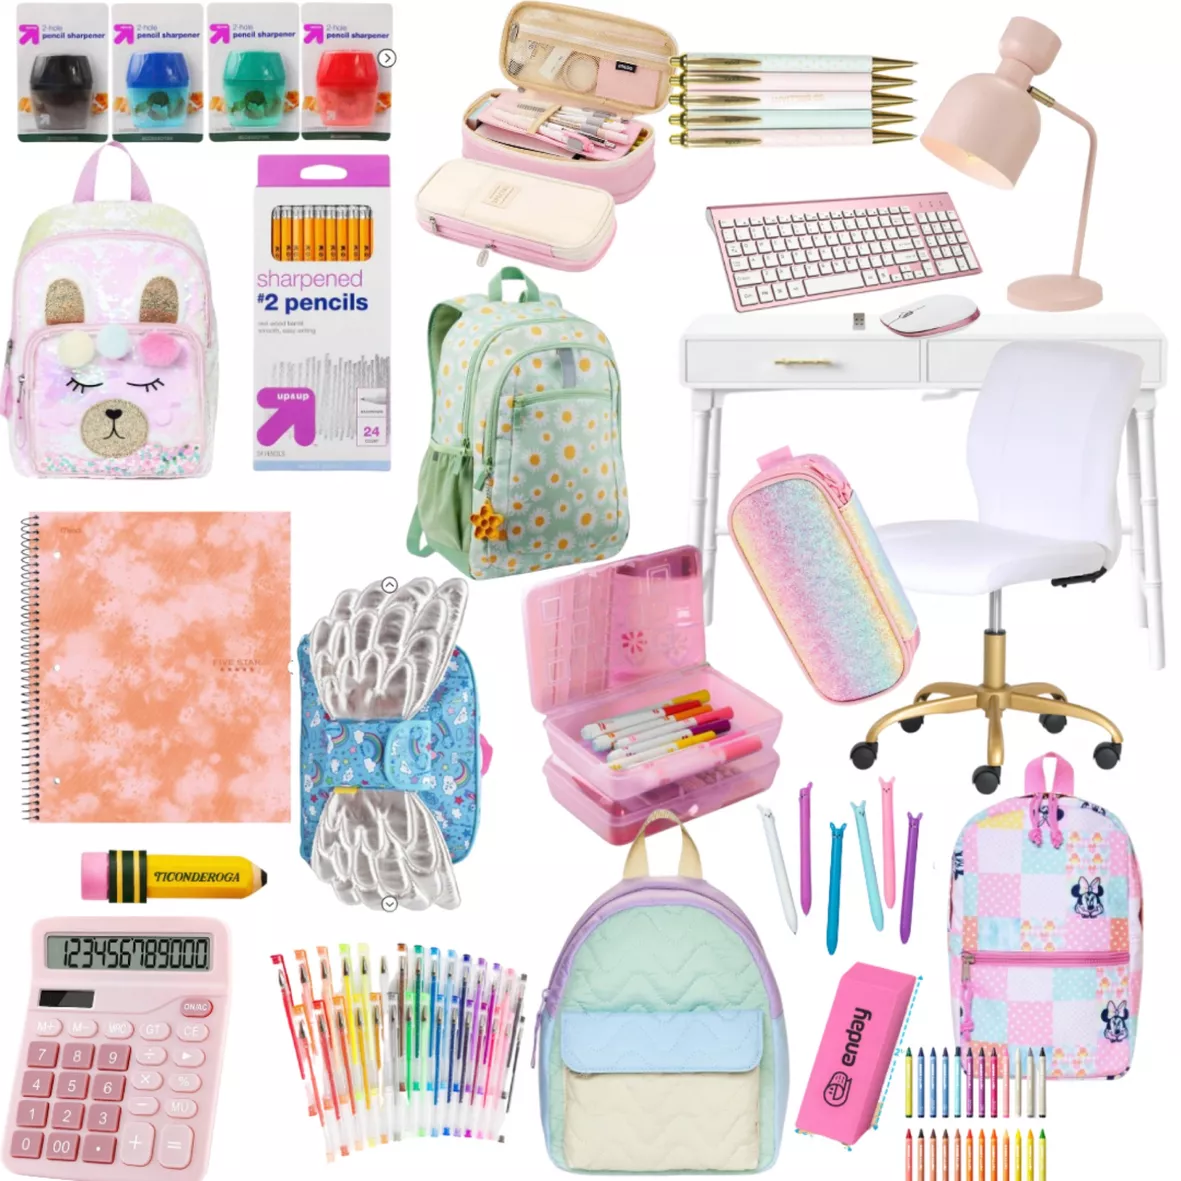 Enday Back to School Supplies for Kids Pink School Supply Box School Gift  New